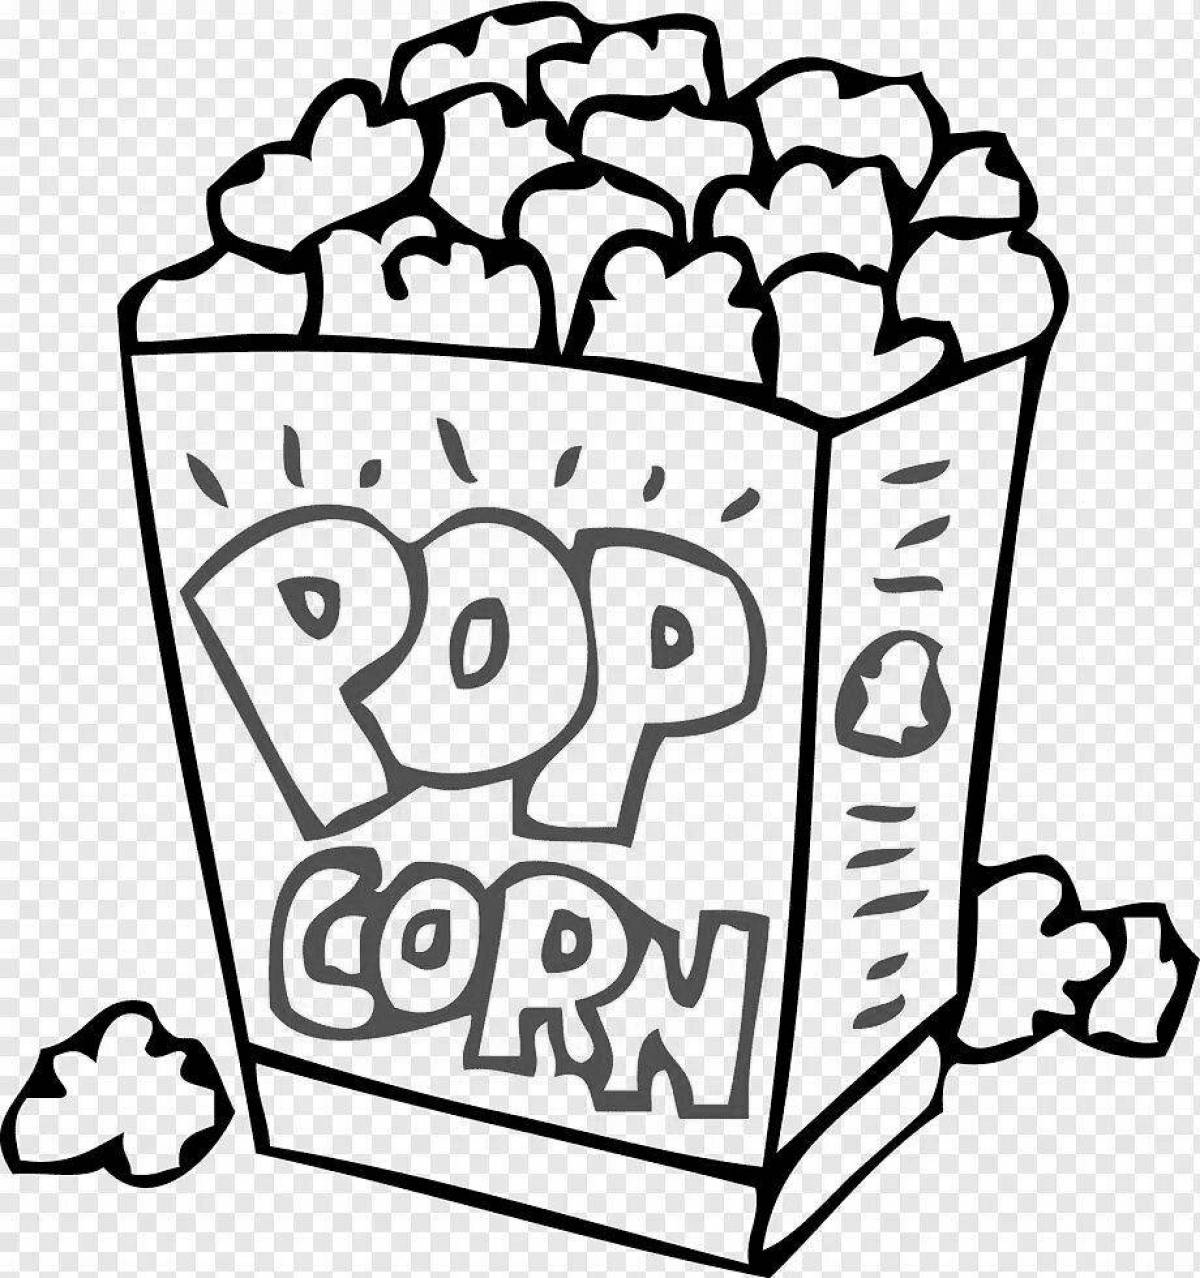 Playful popcorn coloring page for kids